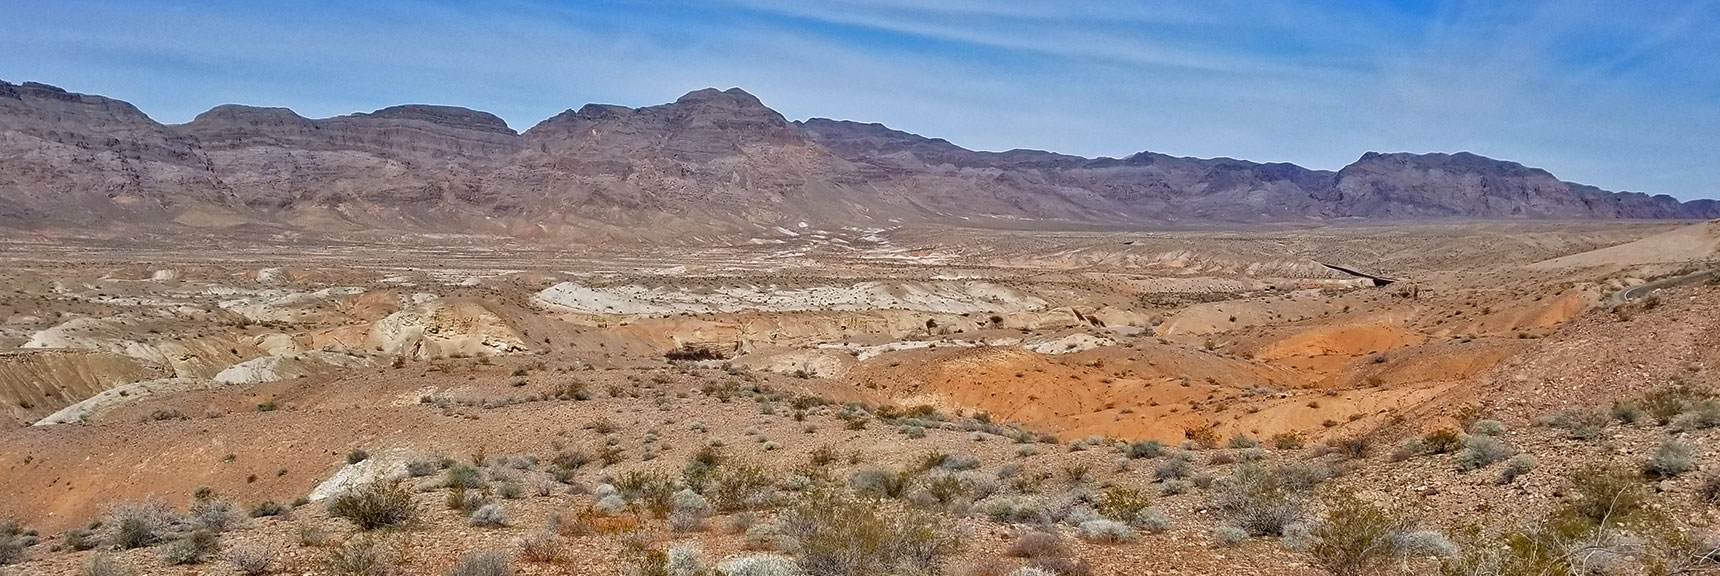 Muddy Mountains and Echo Wash From About Mile 34 On Northshore Road in Lake Mead National Park, Nevada